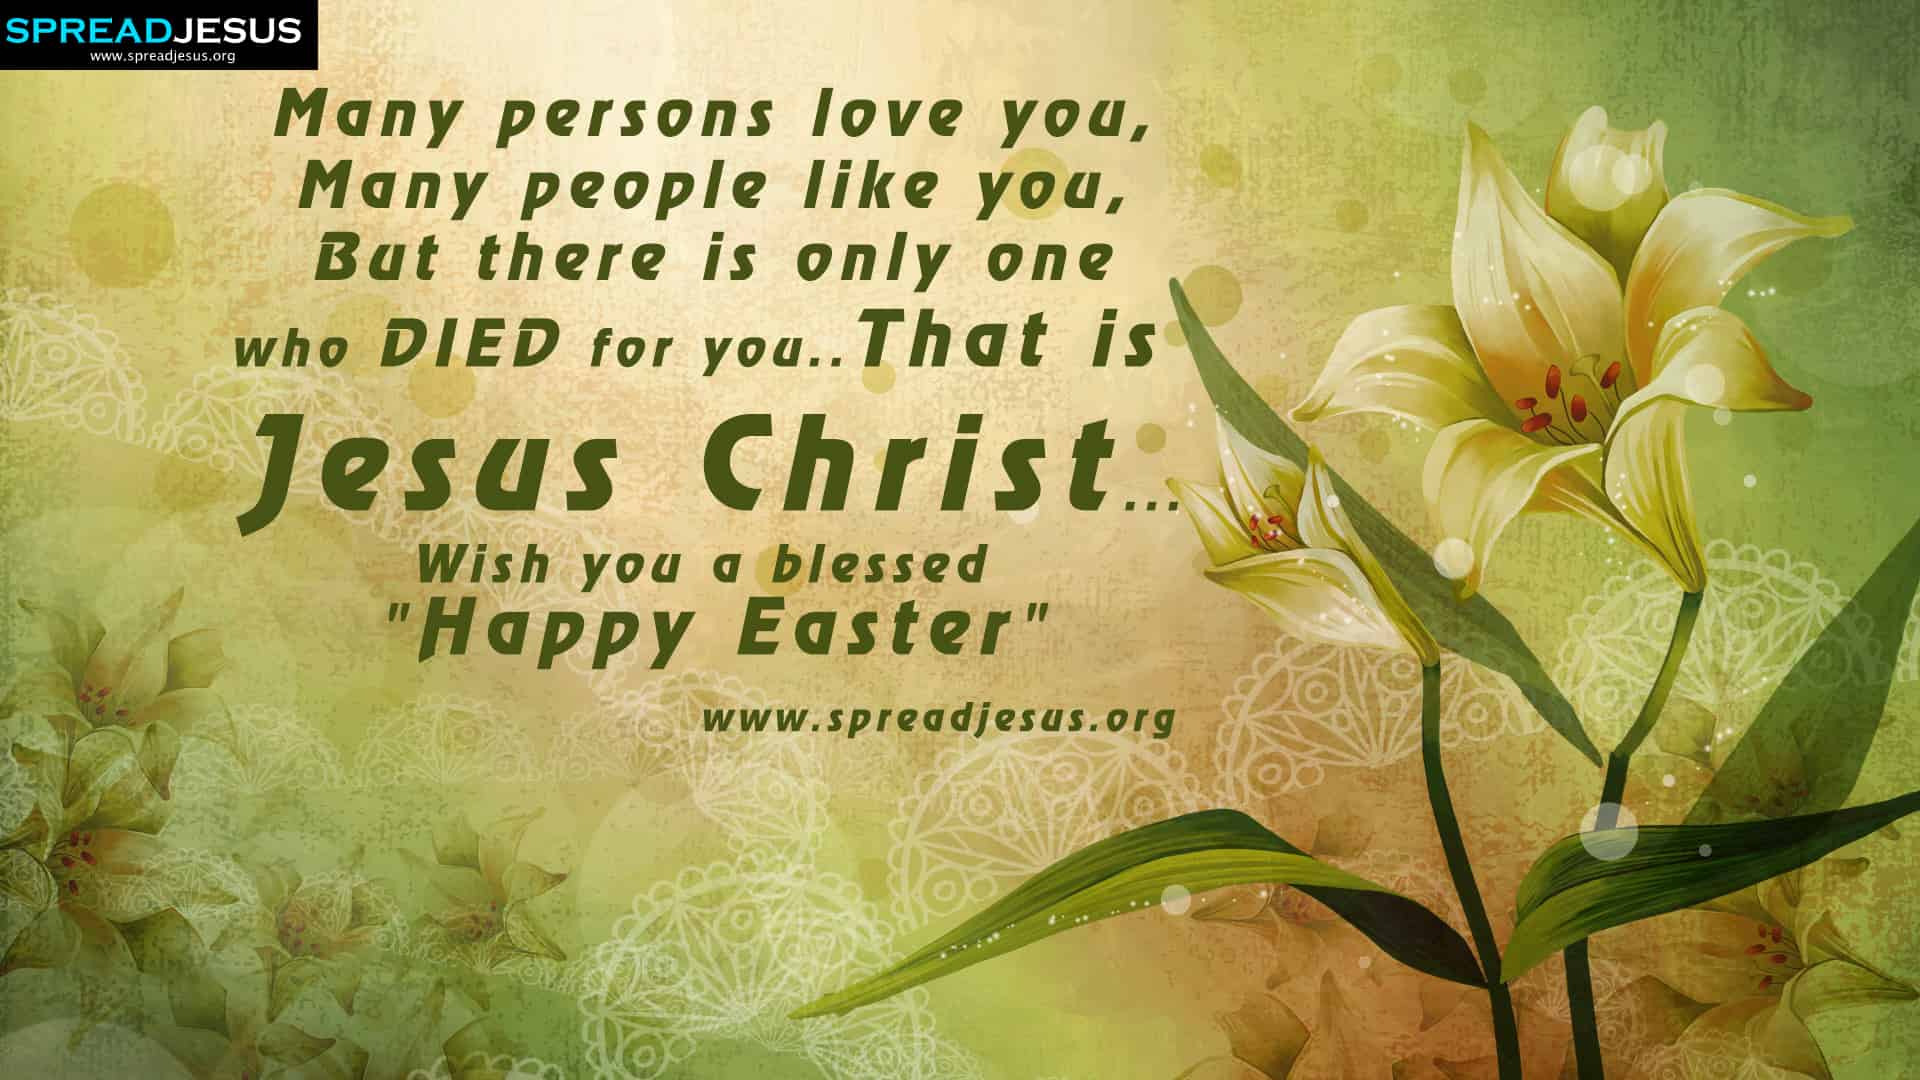 Wish you a blessed Happy Easter EASTER GREETINGS HD-WALLPAPERS